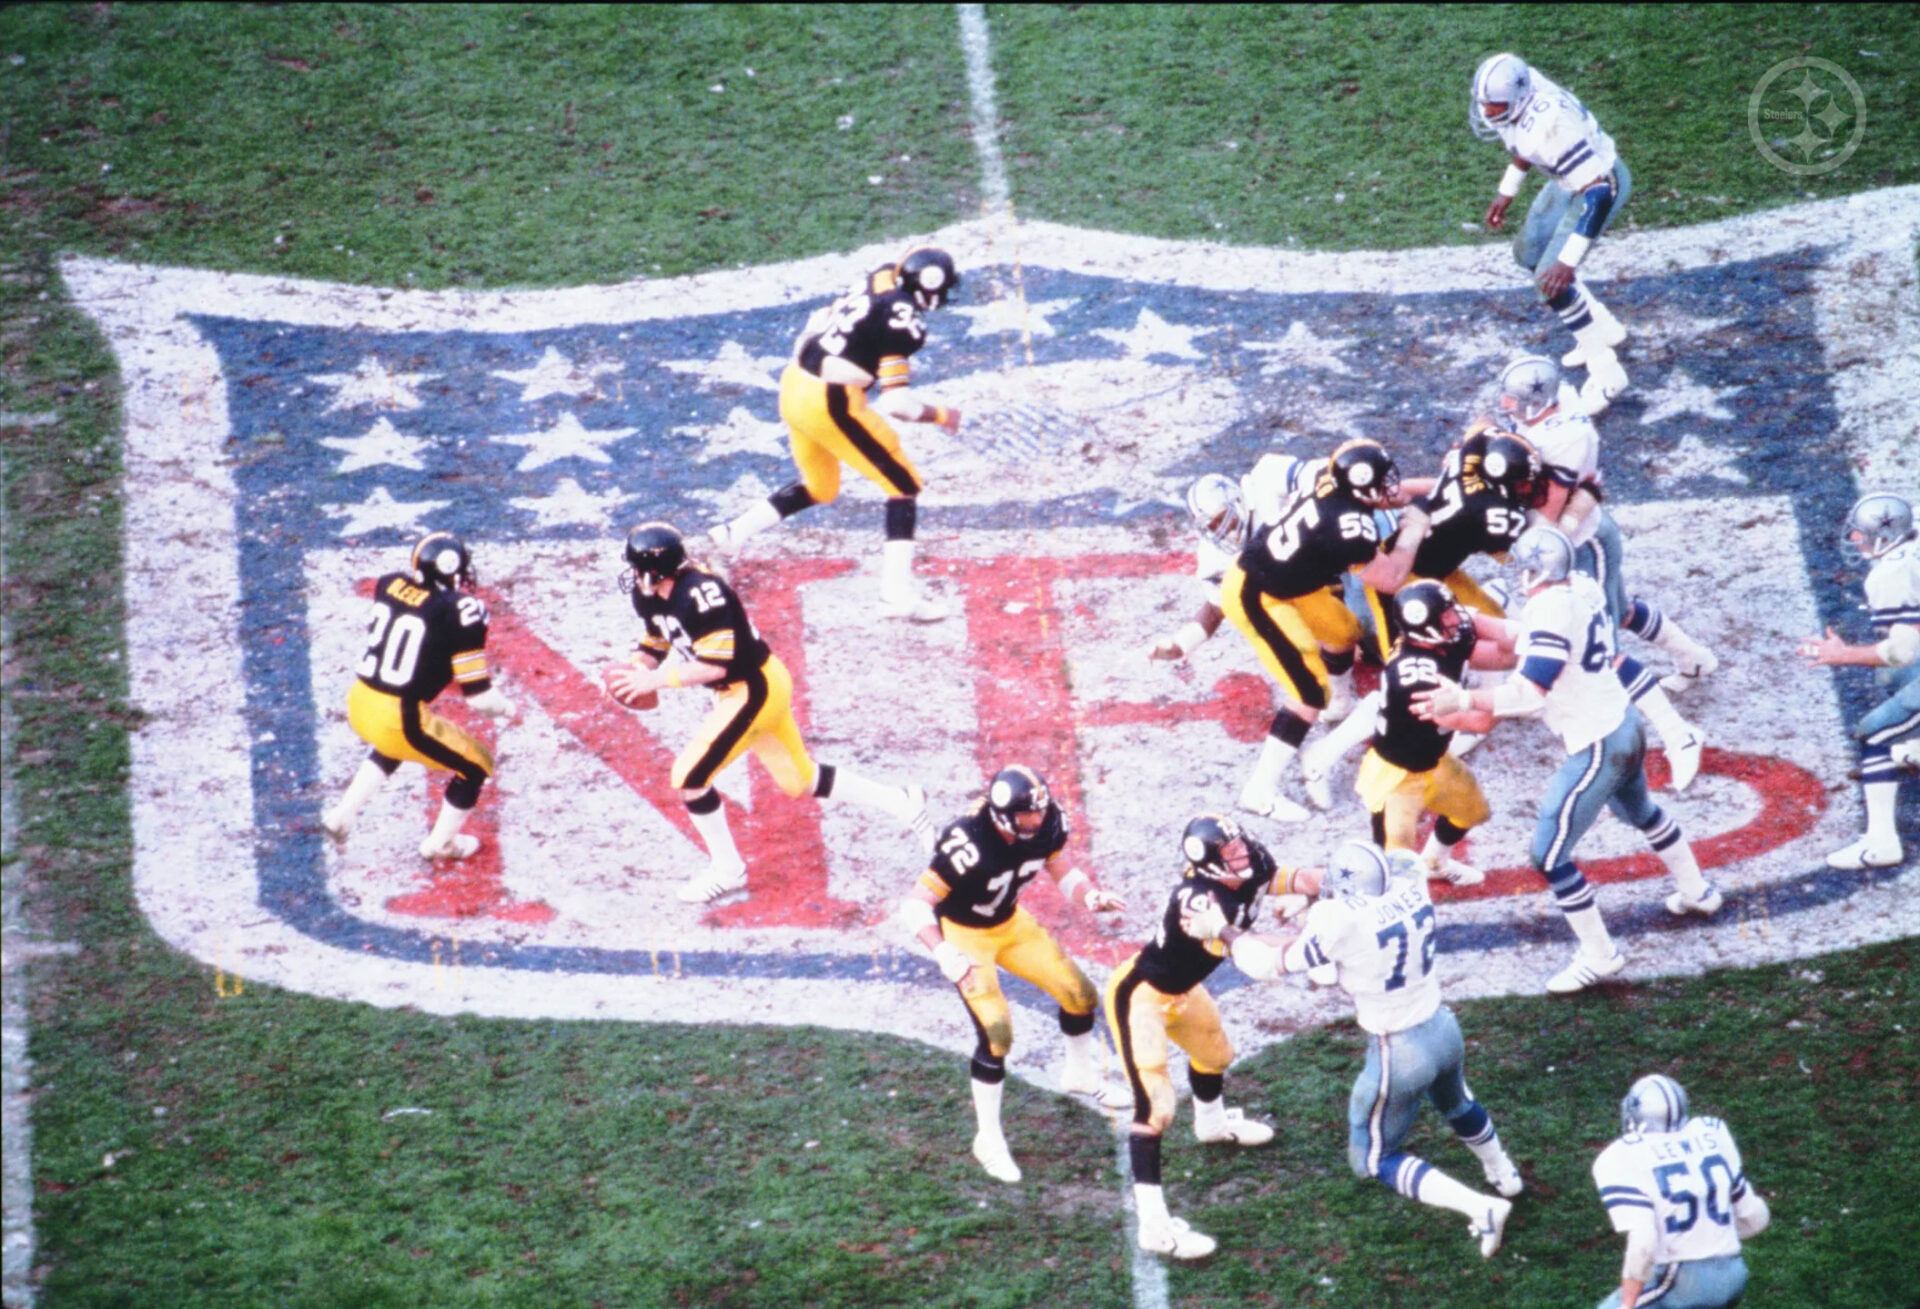 Flashback Friday: That other New York Giants-Bills game in 1990